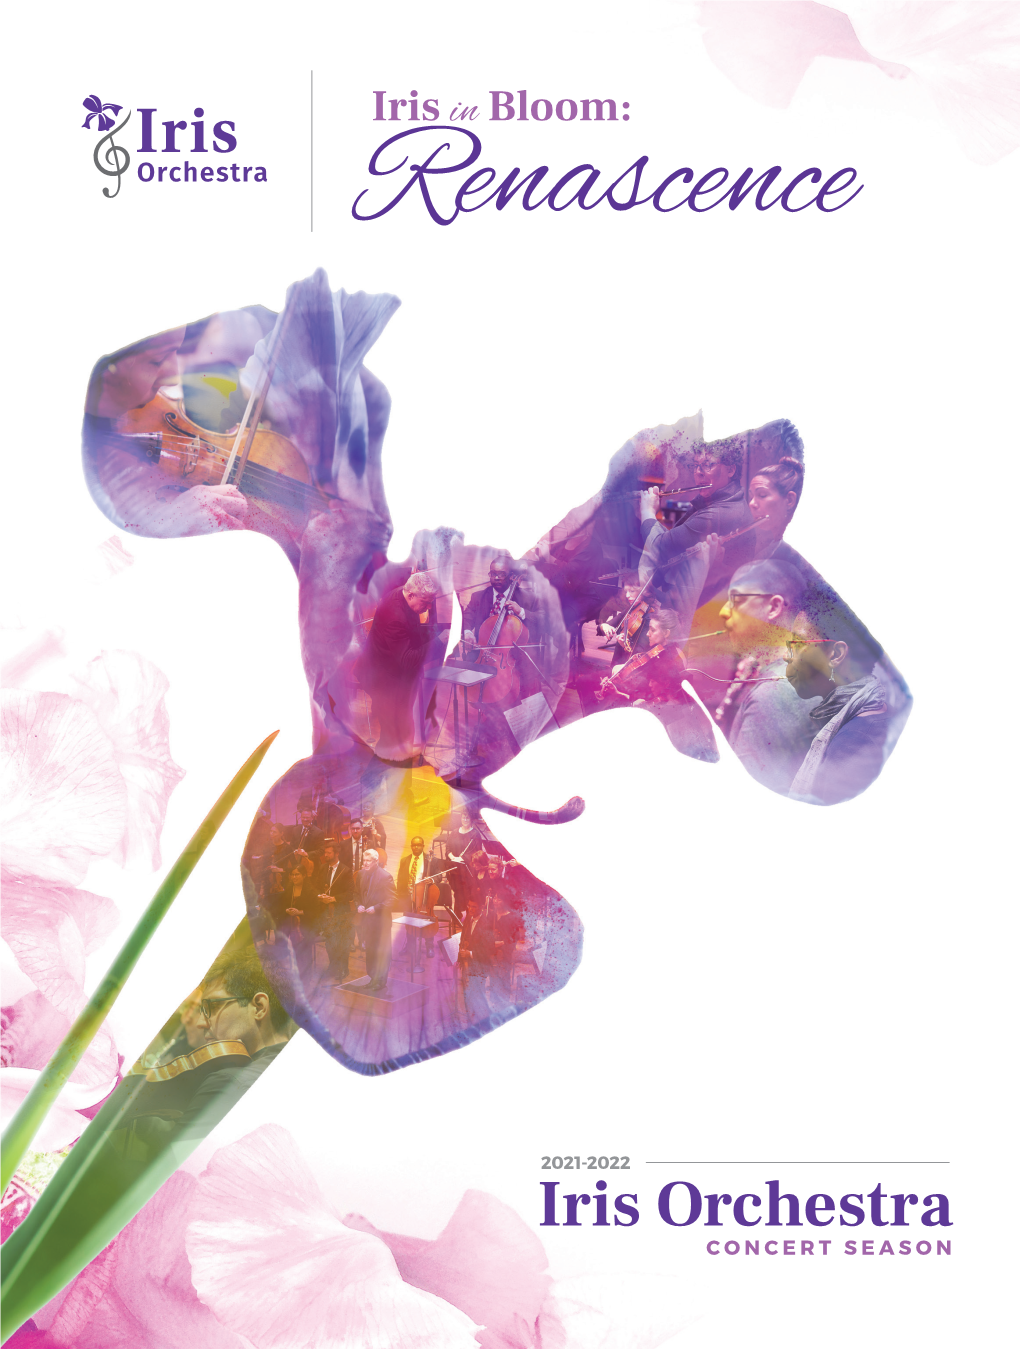 Iris Orchestra CONCERT SEASON 2021-2022 We’Re in Full Bloom! JOIN US AS WE CELEBRATE OUR 22ND SEASON